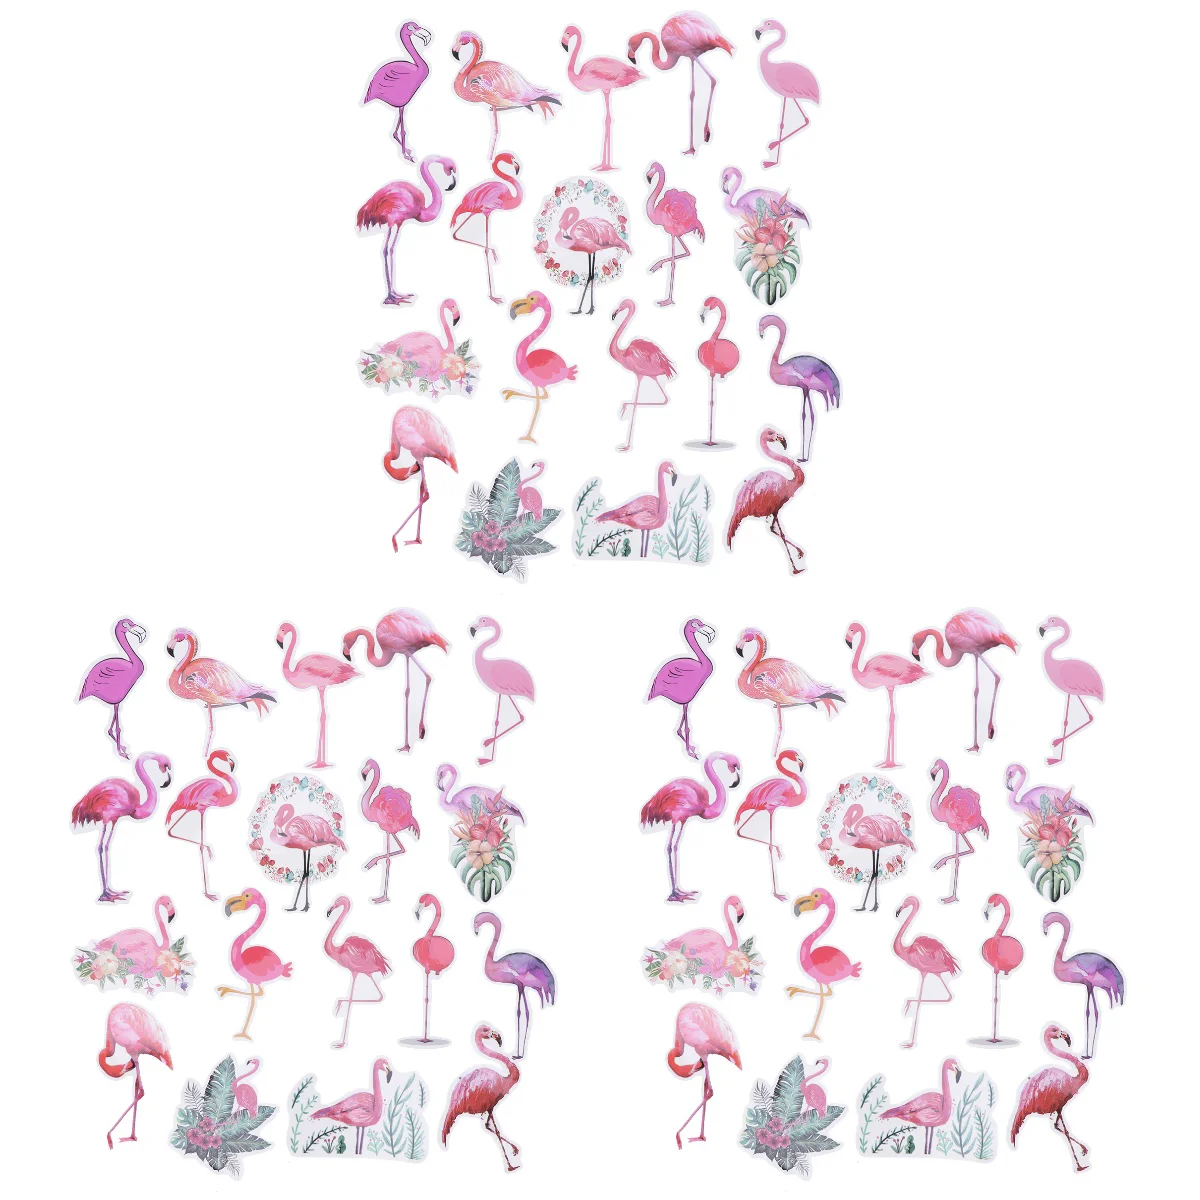 

57 Pcs /Pack Pink Flamingo Luggage Decals PVC Waterproof Luggage Stickers for Laptop Phone Notebook